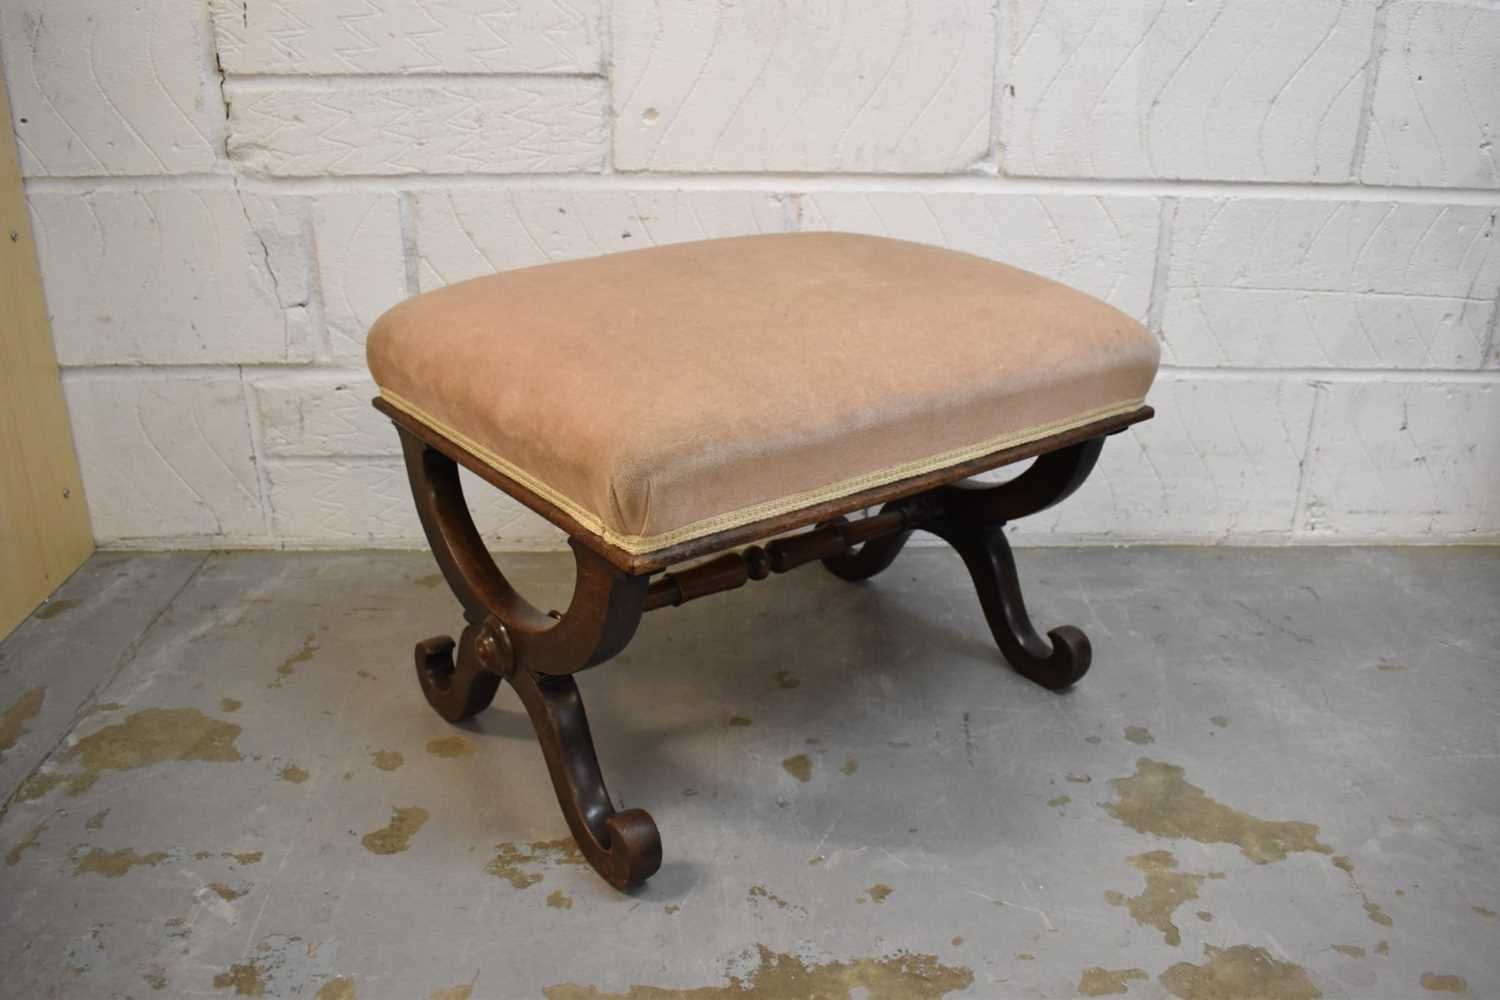 Early 19th century X-frame stool with removable seat